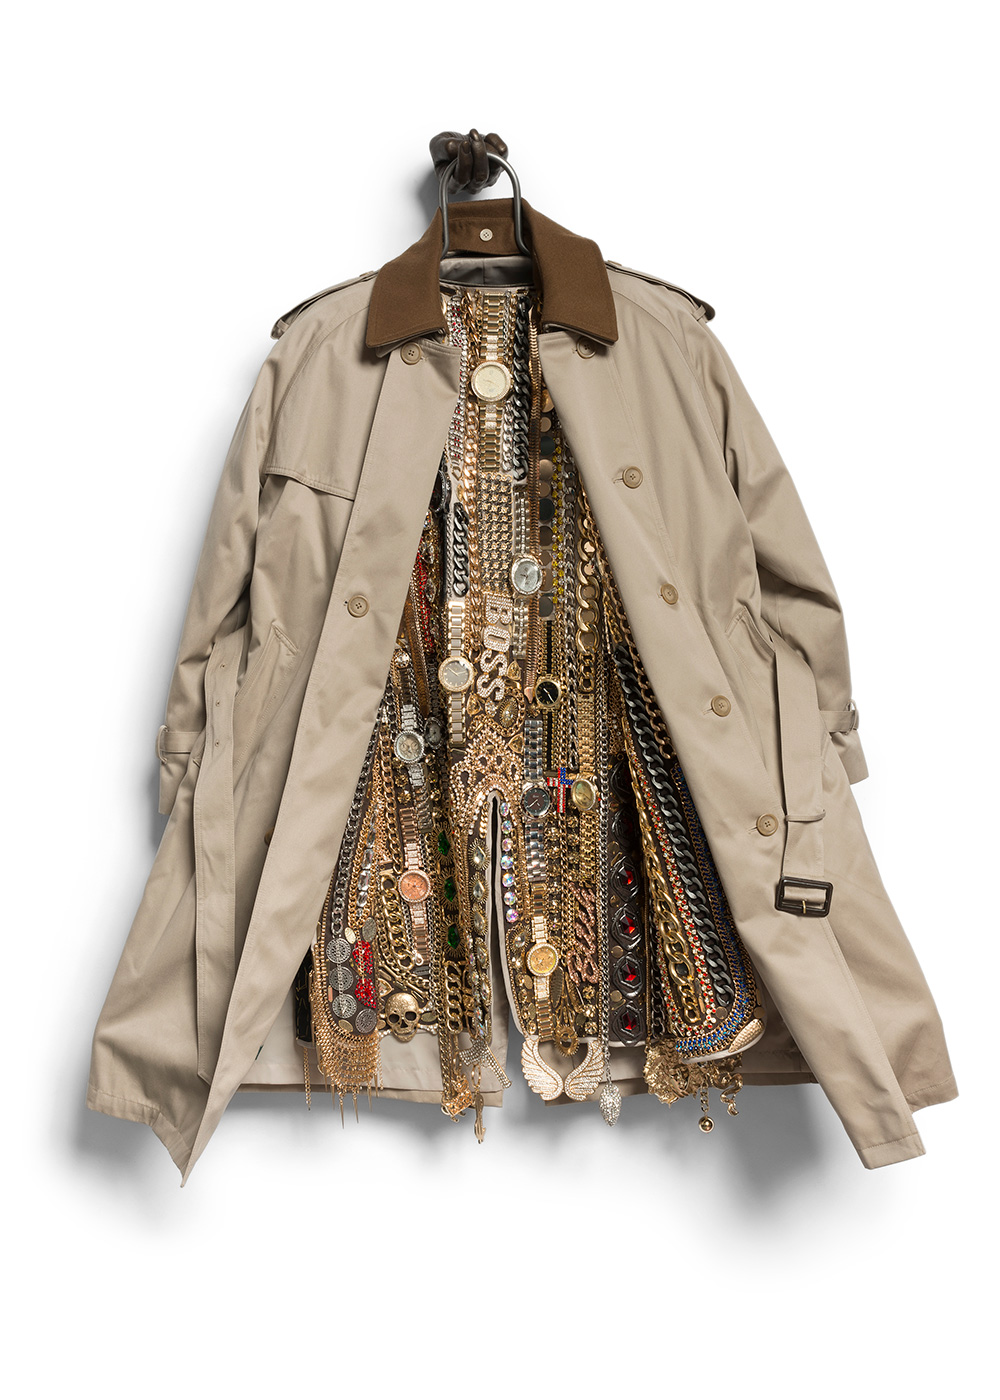 Nick Cave, Hustle Coat, 2017. Mixed media including a trench coat, cast bronze hand, metal, costume jewelry, watches, and chains. © Nick Cave. Courtesy of the artist and Jack Shainman Gallery, New York. Photo: James Prinz Photography.